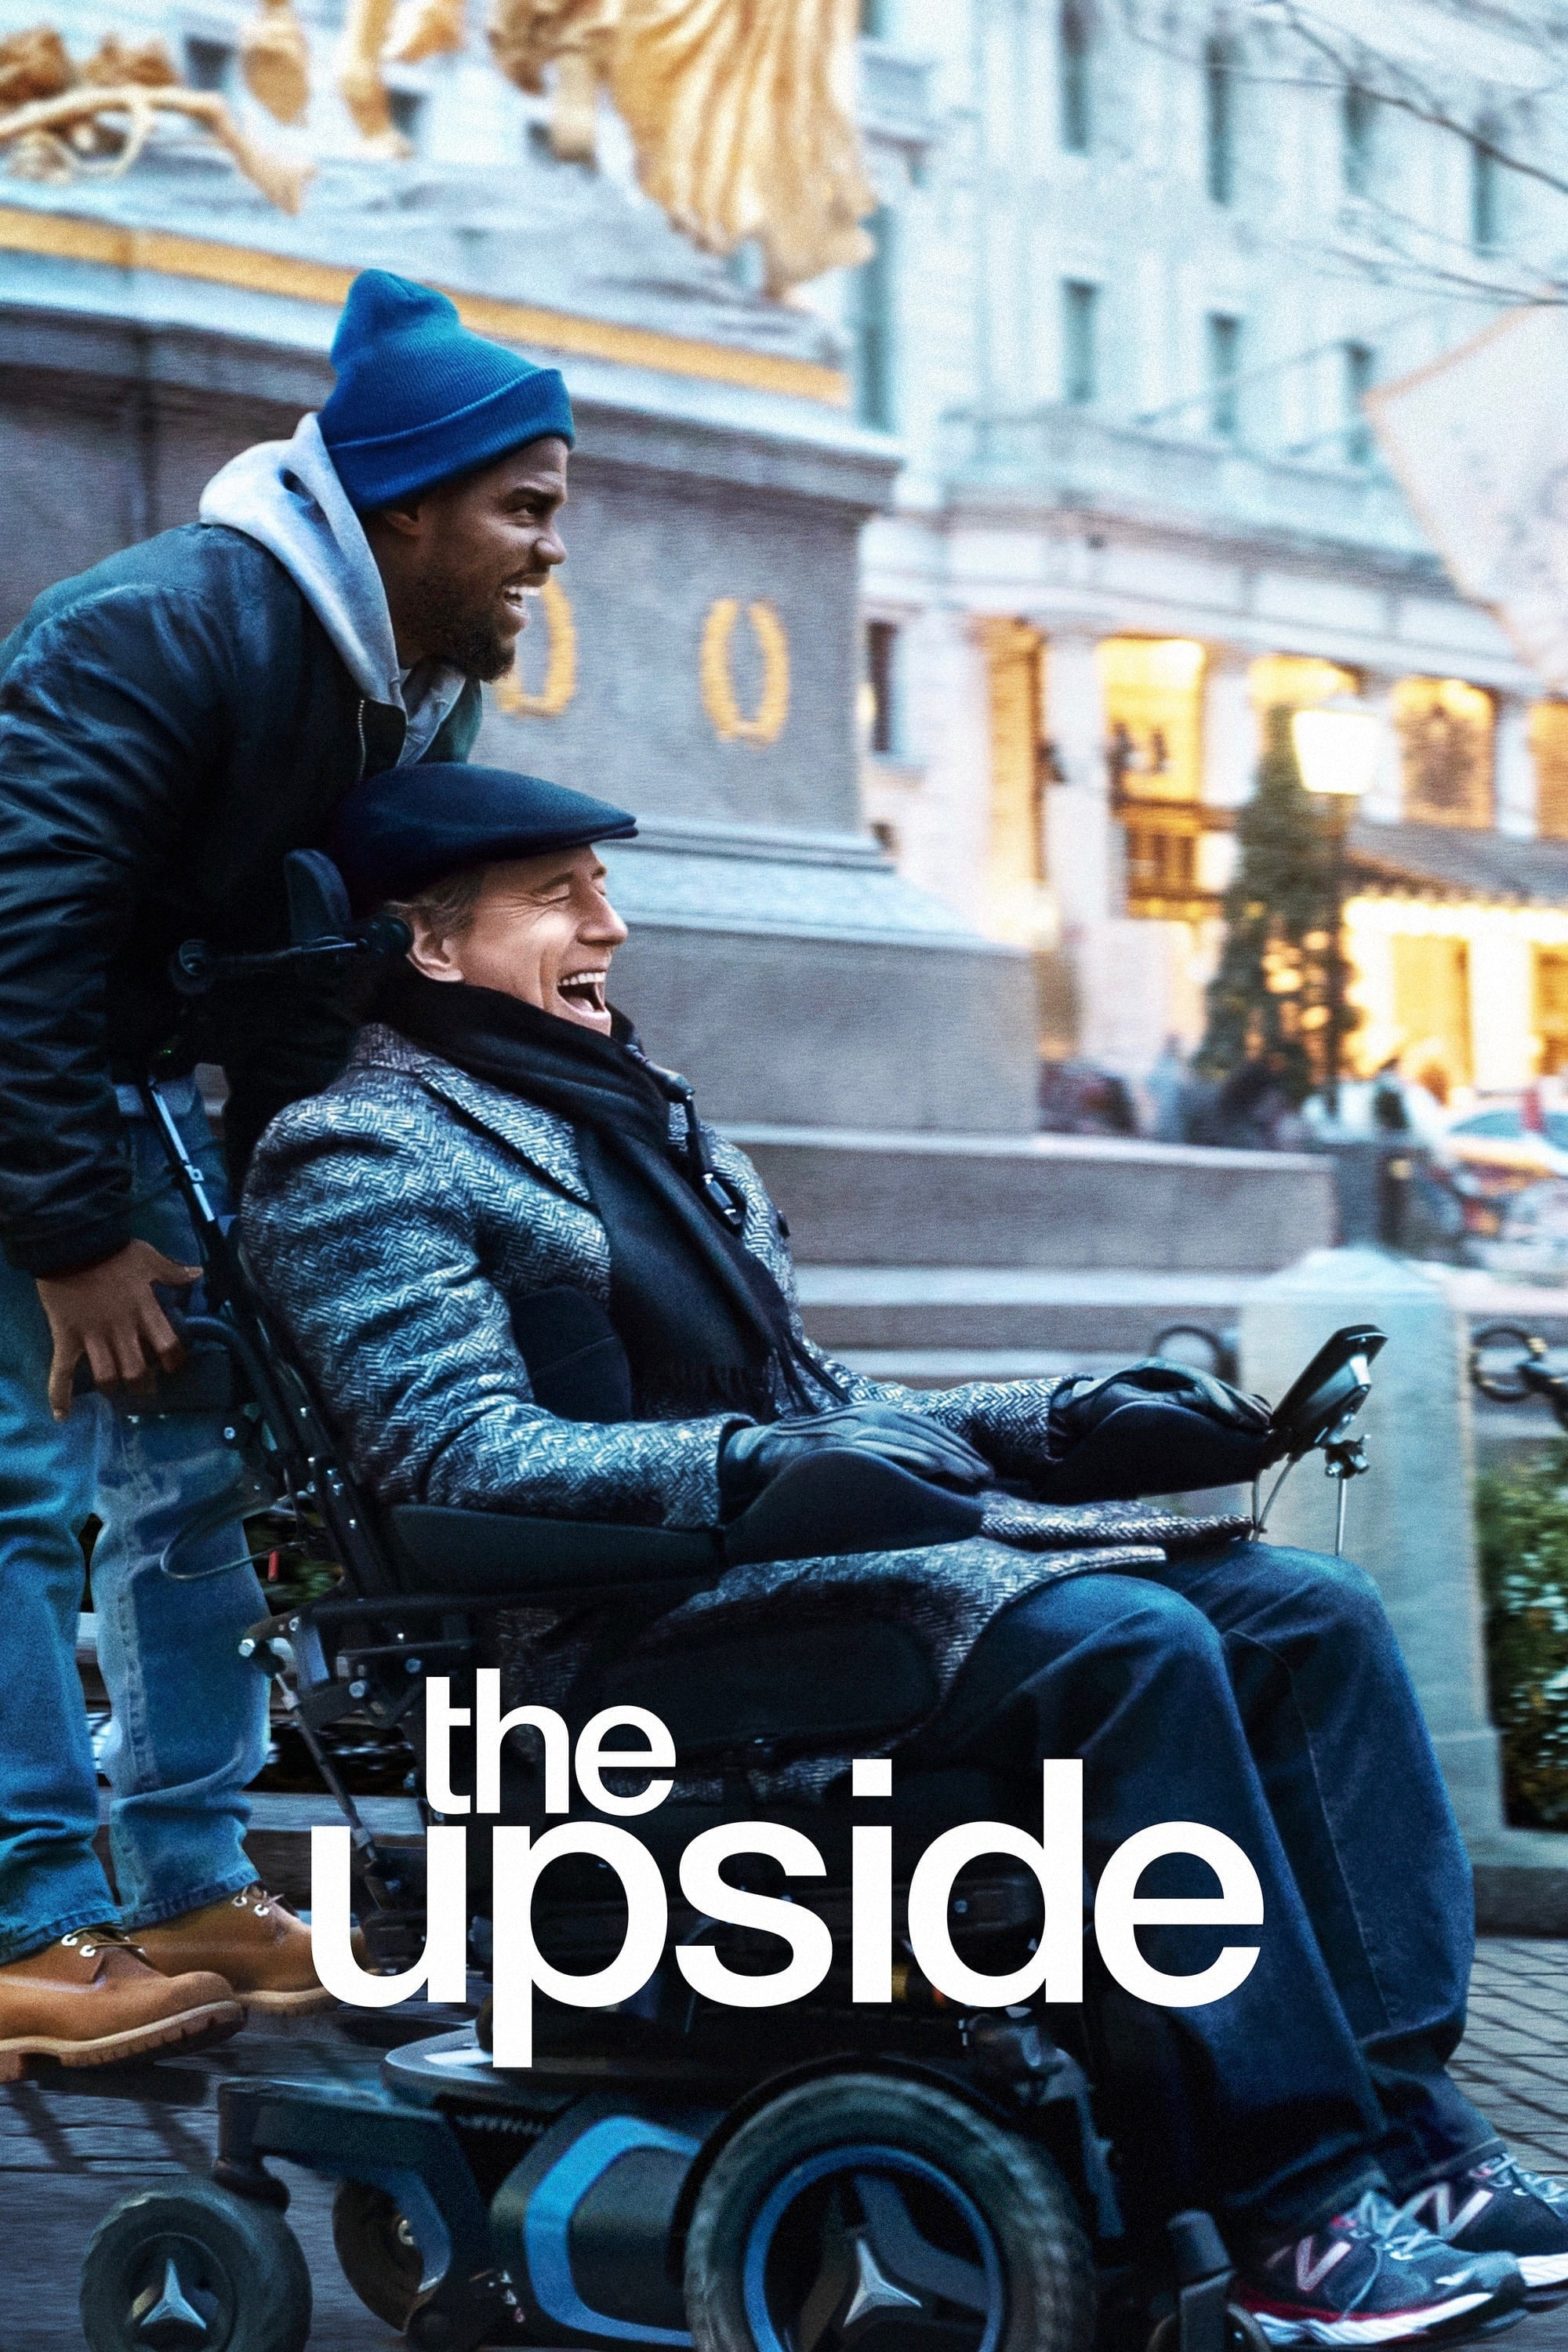 Poster for the movie "The Upside"